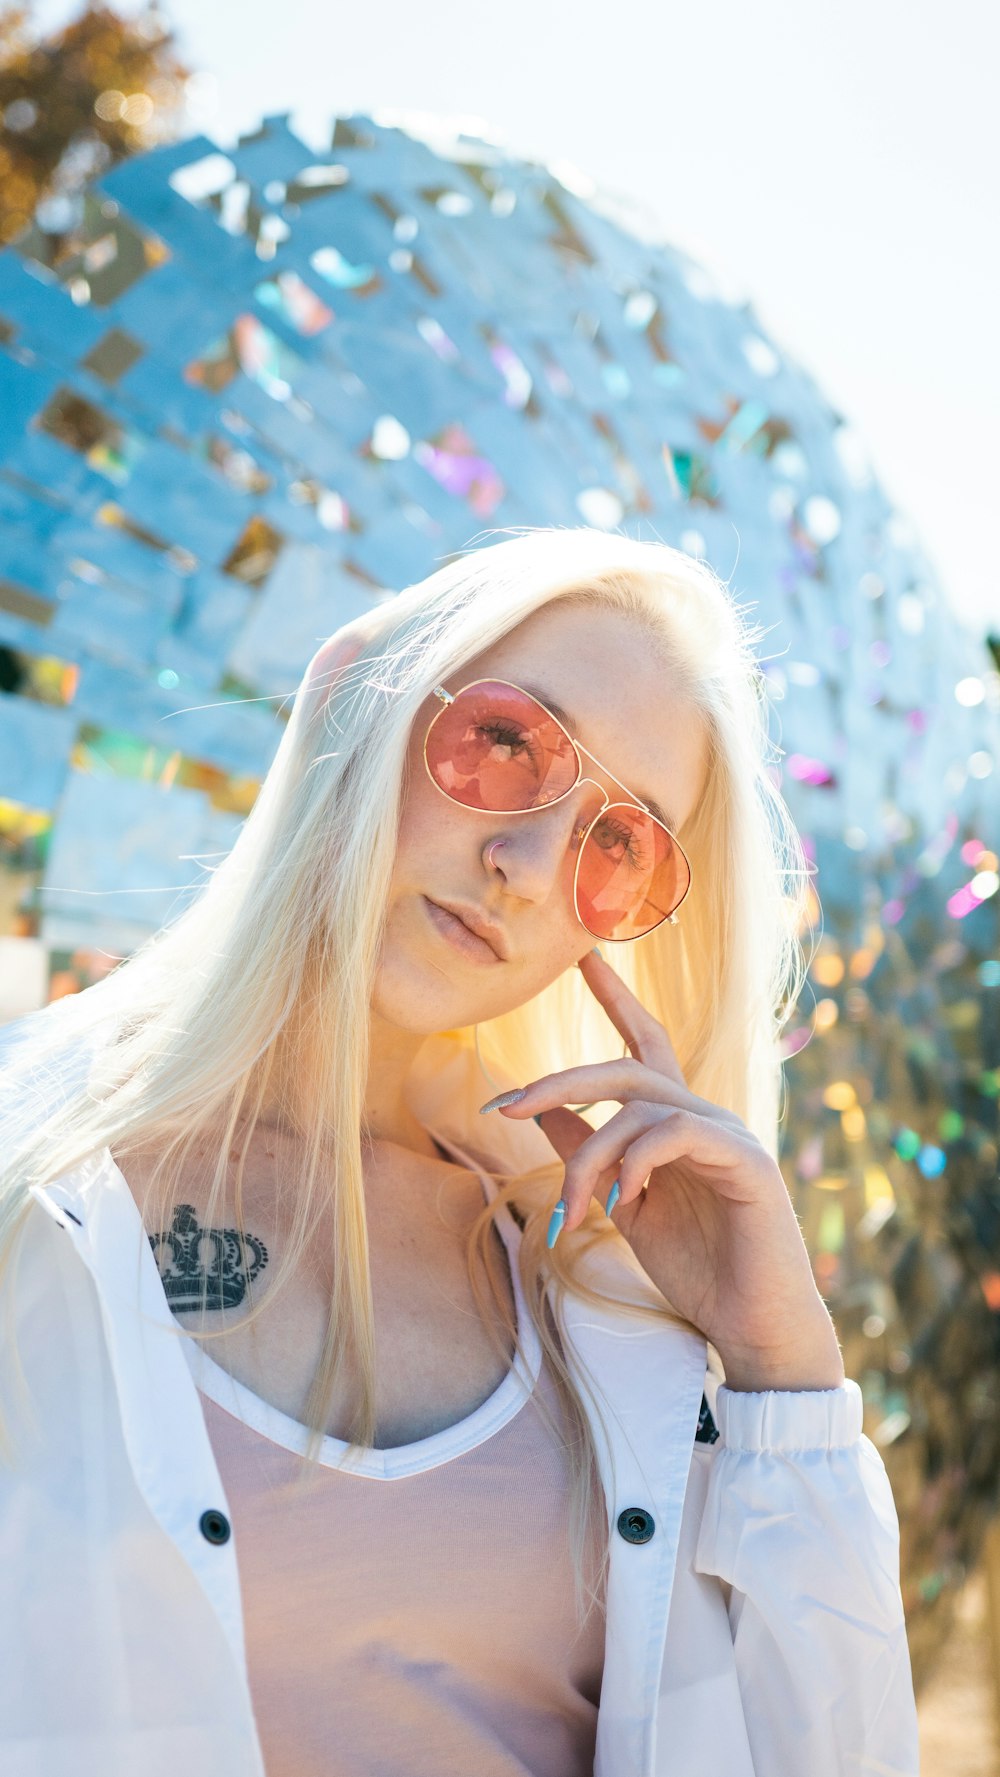 a woman with blonde hair and sunglasses posing for a picture